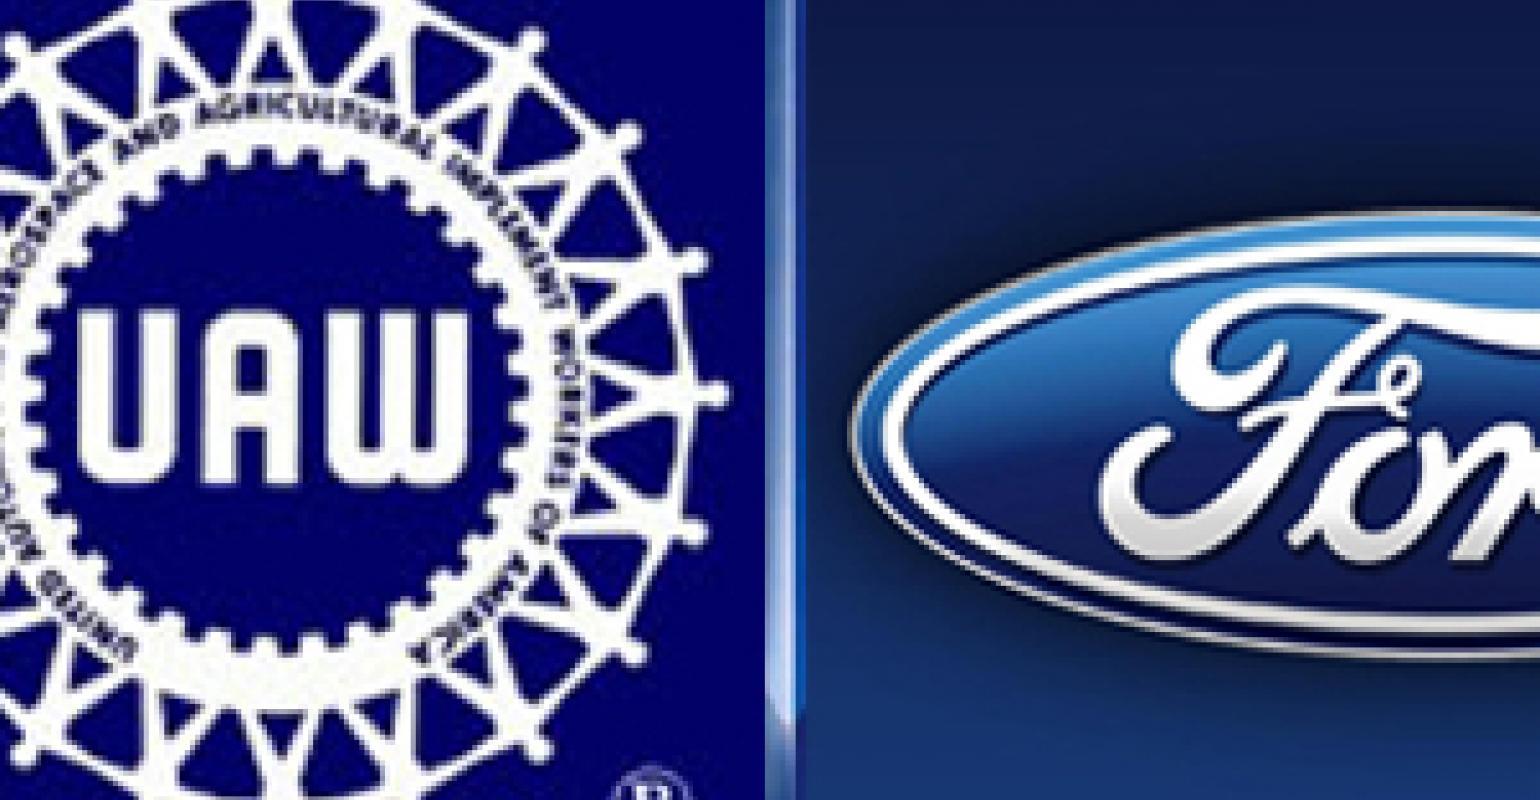 Ford UAW Logo - UAW Contract Brings Productivity Gains at Modest Cost Increase, Ford